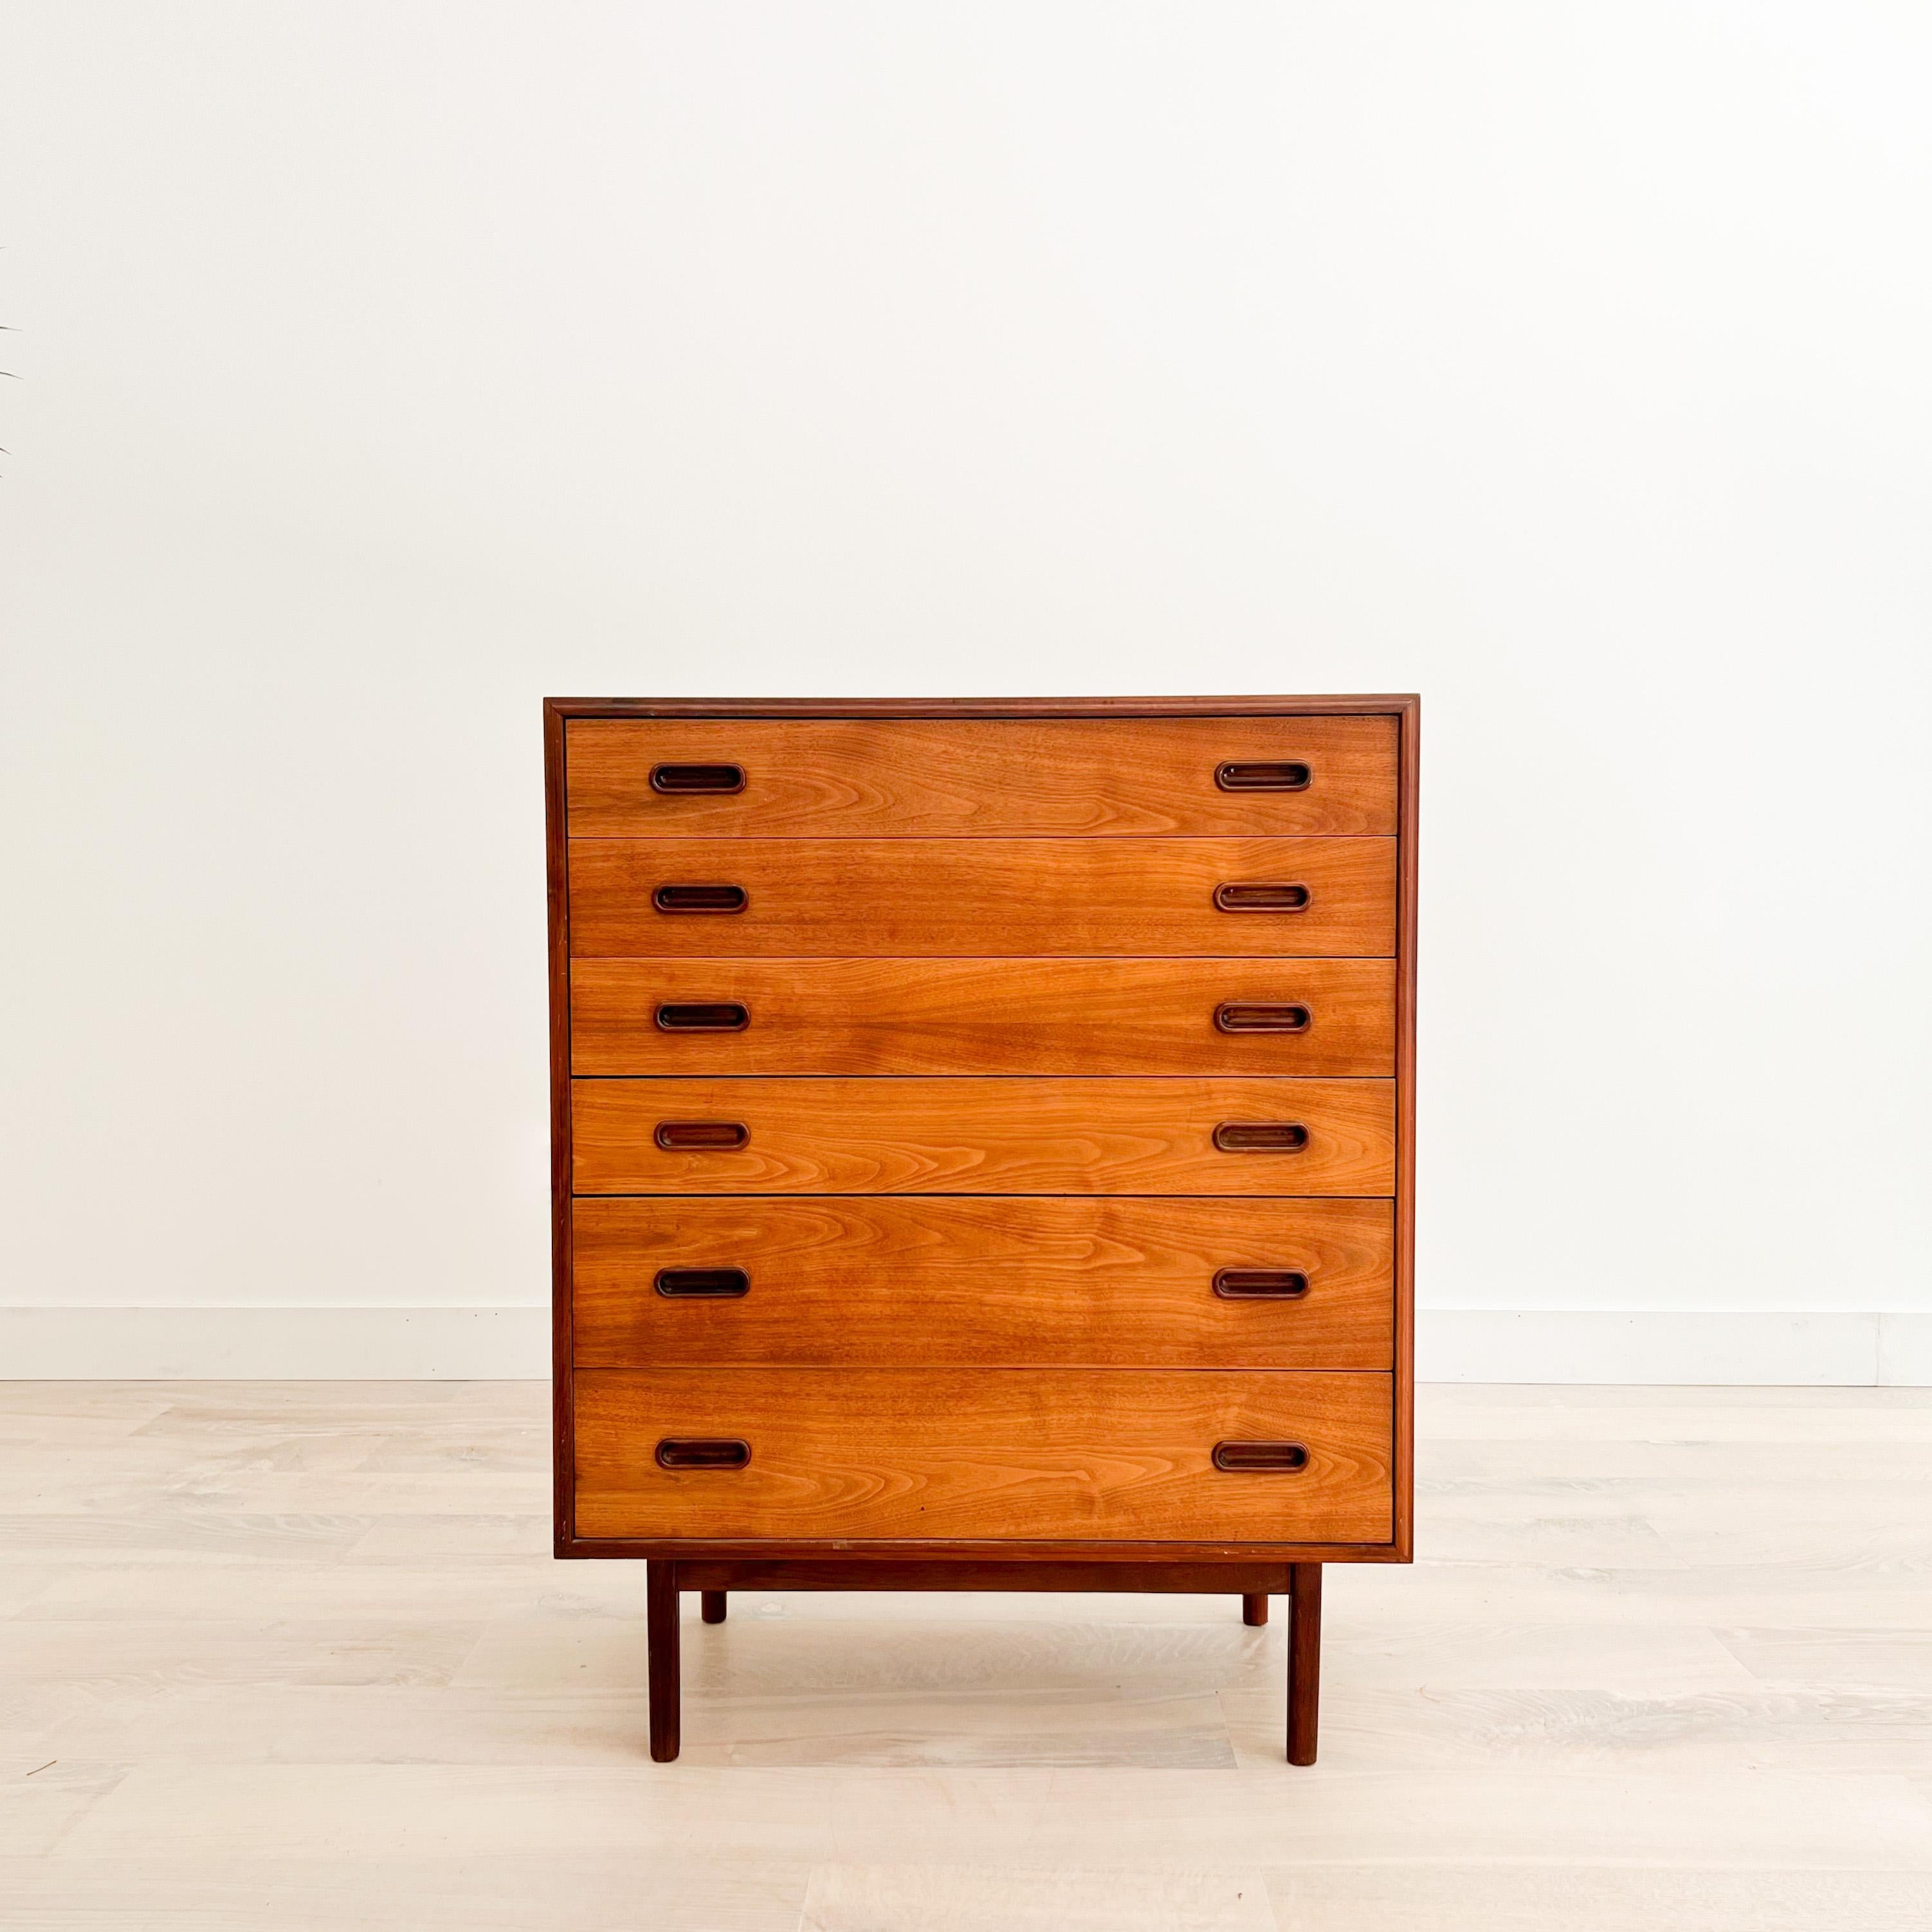 Rare Mid-Century Modern highboy dresser designed by Jack Cartwright for Founders. The top and drawer fronts have been sanded and restored. Some light scuffing, scratching and areas of veneer repair from age appropriate wear. This highboy dresser